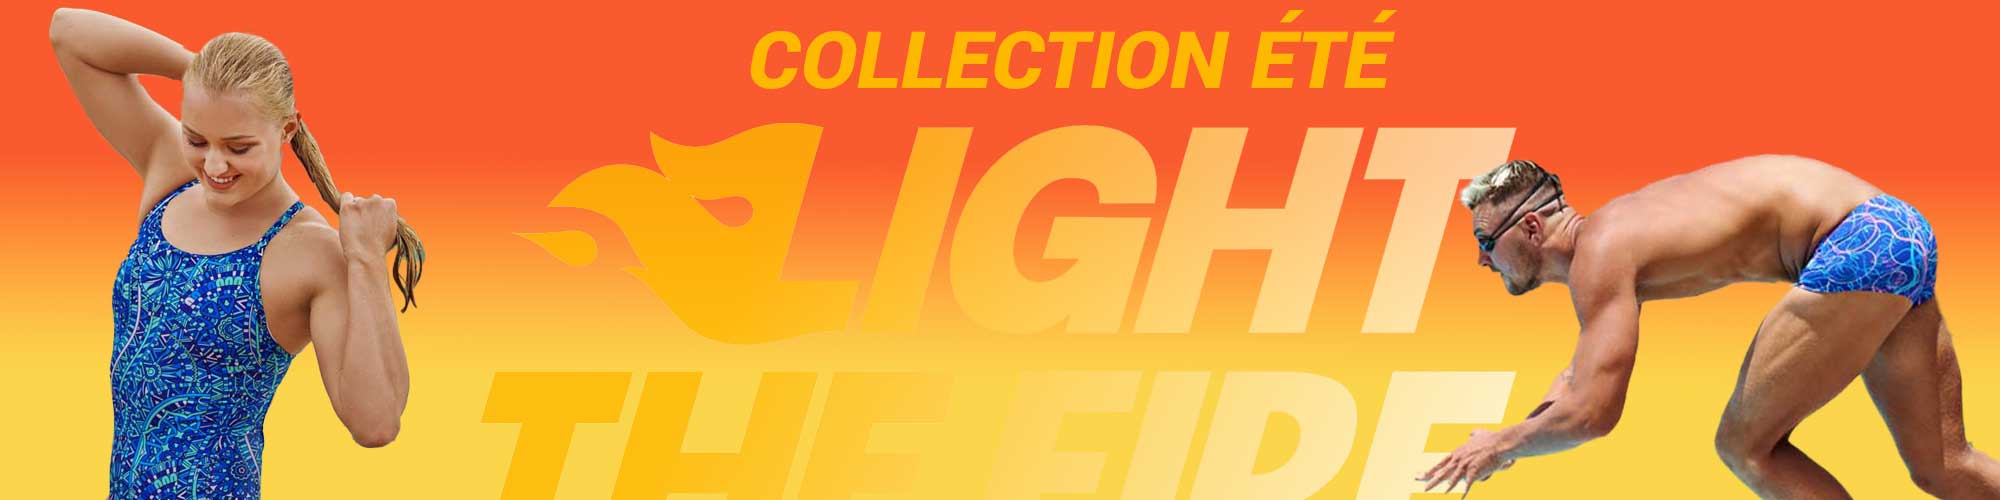 Collection LightTheFire